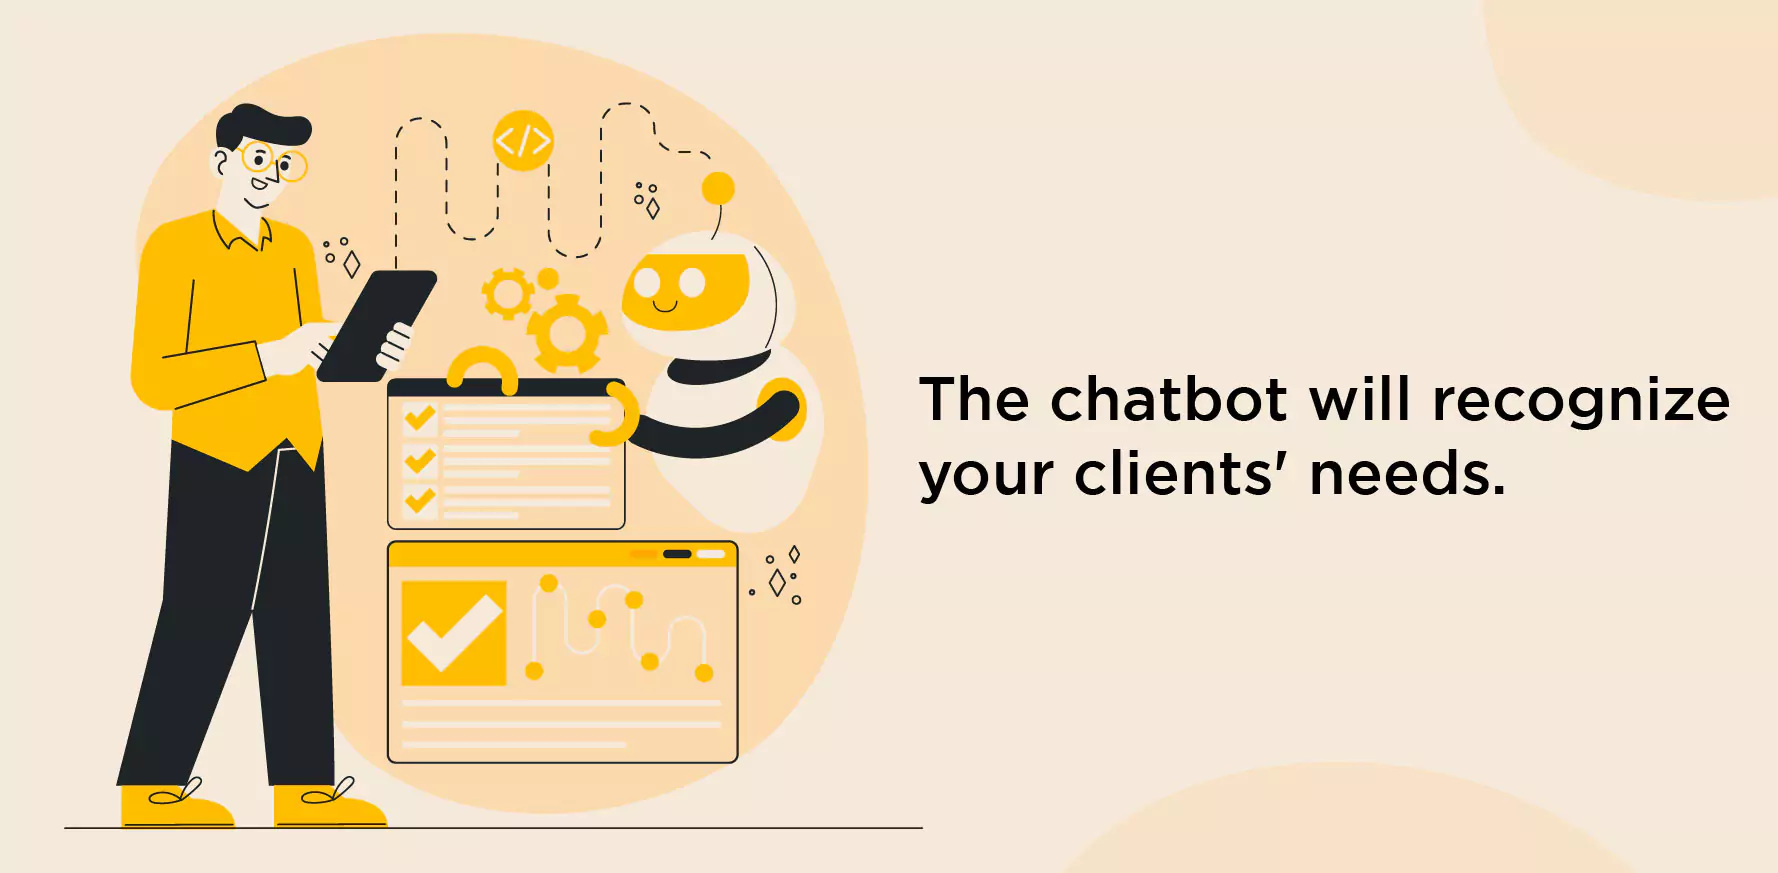 The chatbot will recognize your clients' needs.